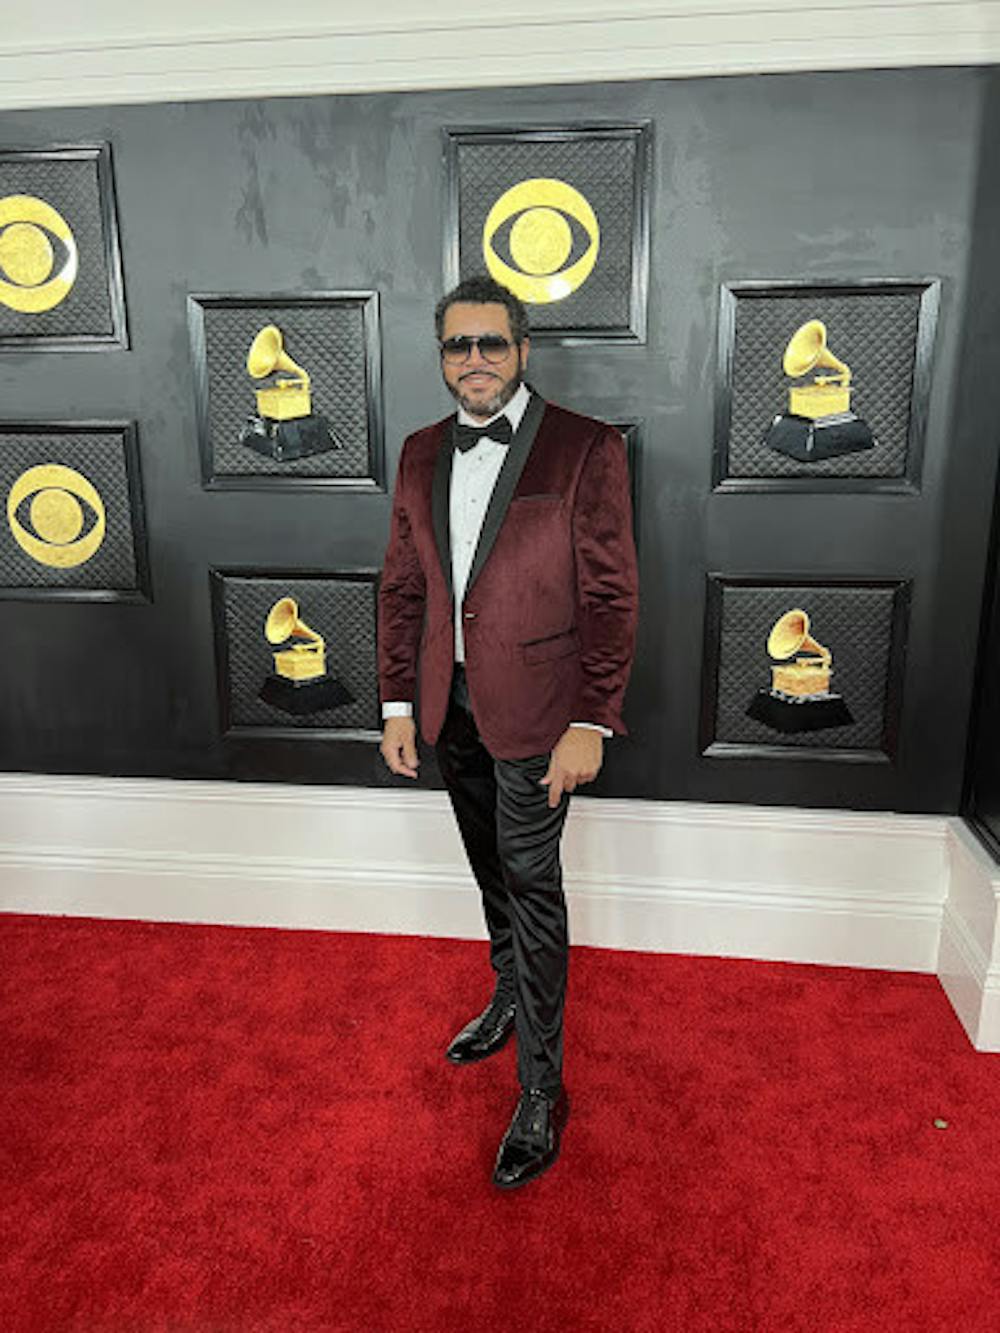 <p><em>Beaver’s 2018 Grammy Award for Best Tropical Latin Album came only a year after he earned a nomination for his breakout solo album, “Art of the Arrangement” —  an experience he described as “amazing” (Photo courtesy of Doug Beavers).</em></p>